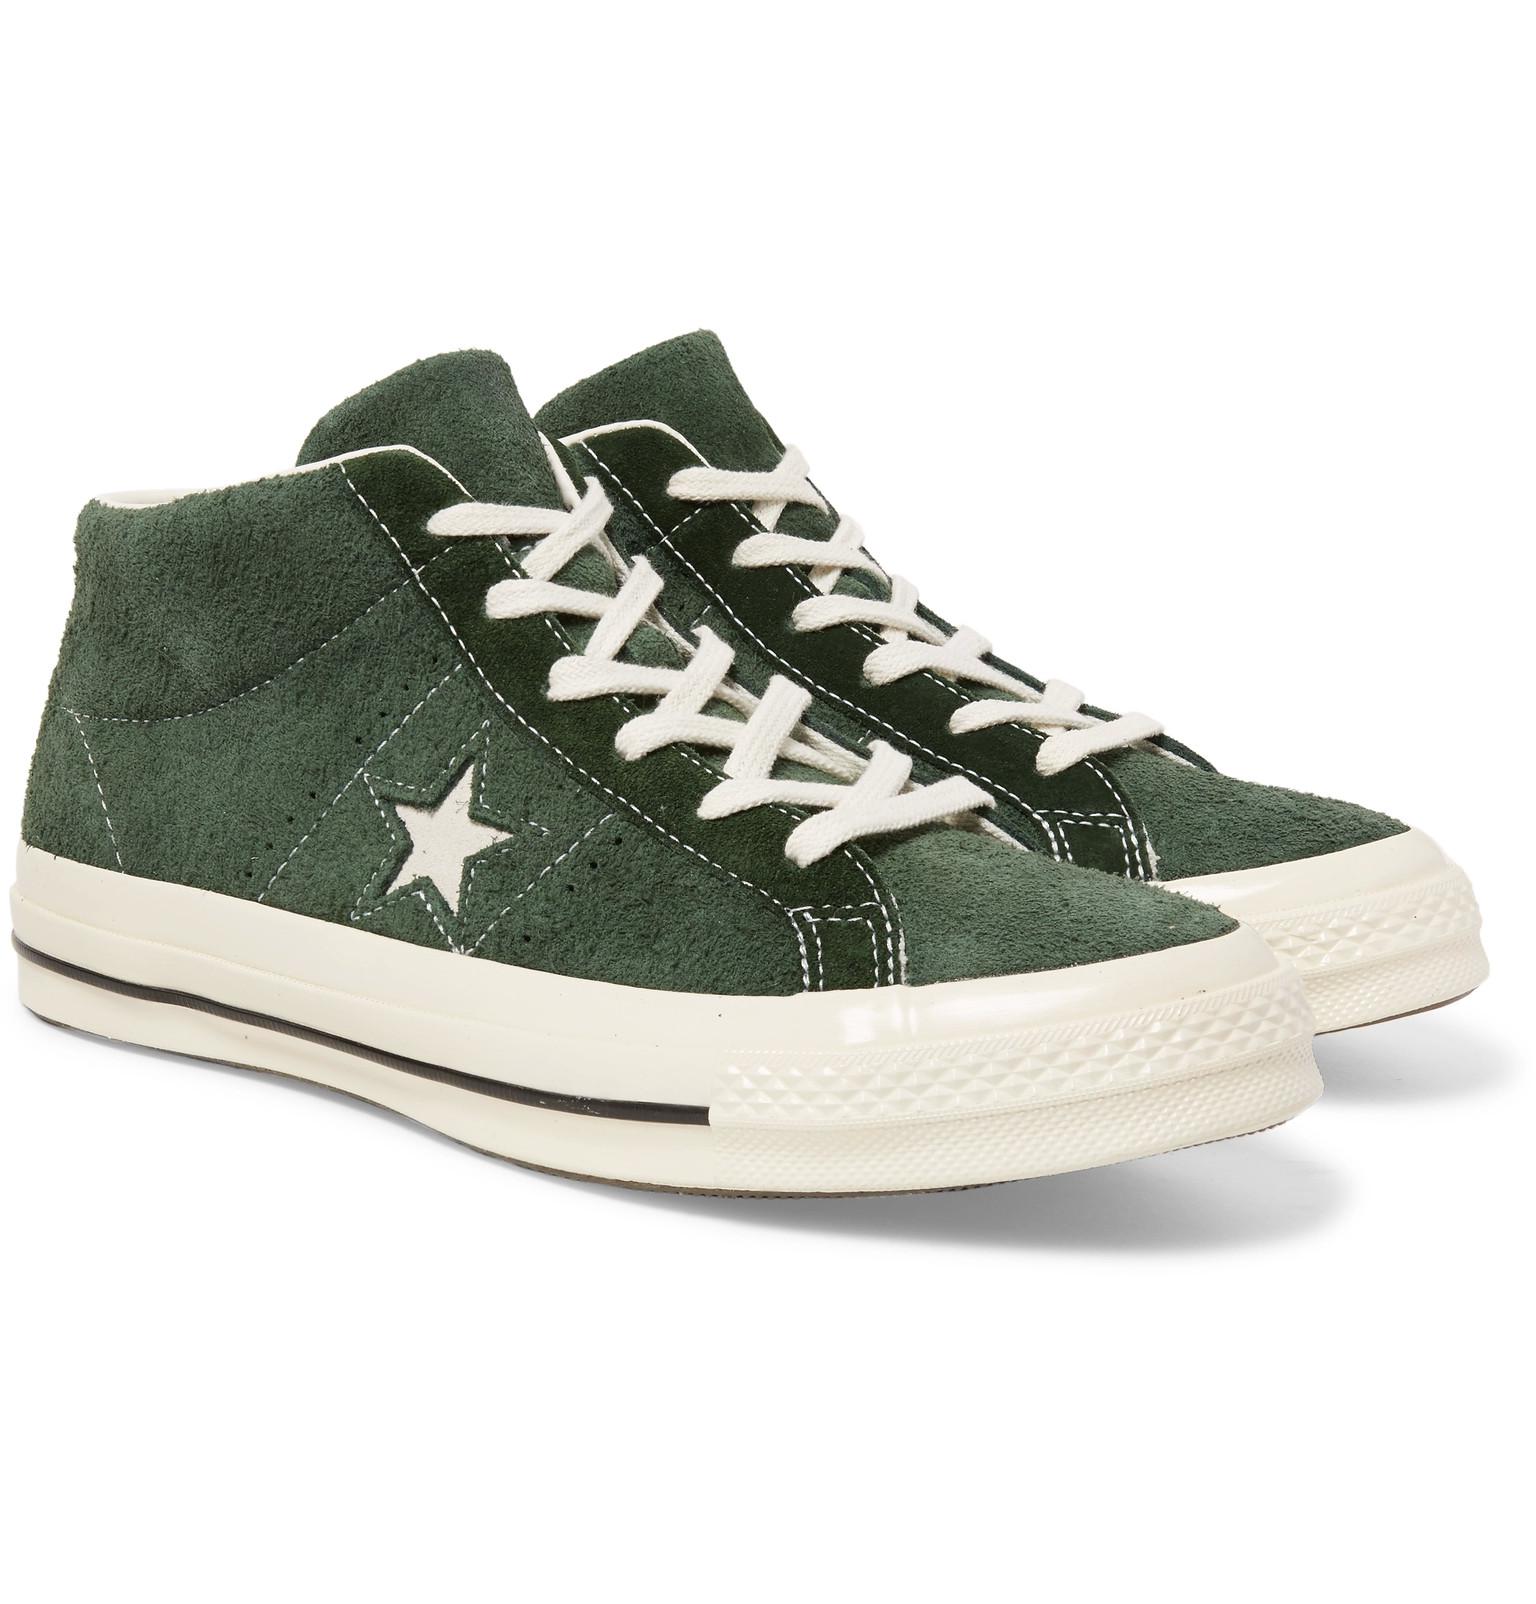 Converse 1974 One Star Suede Sneakers in Green for Men - Lyst